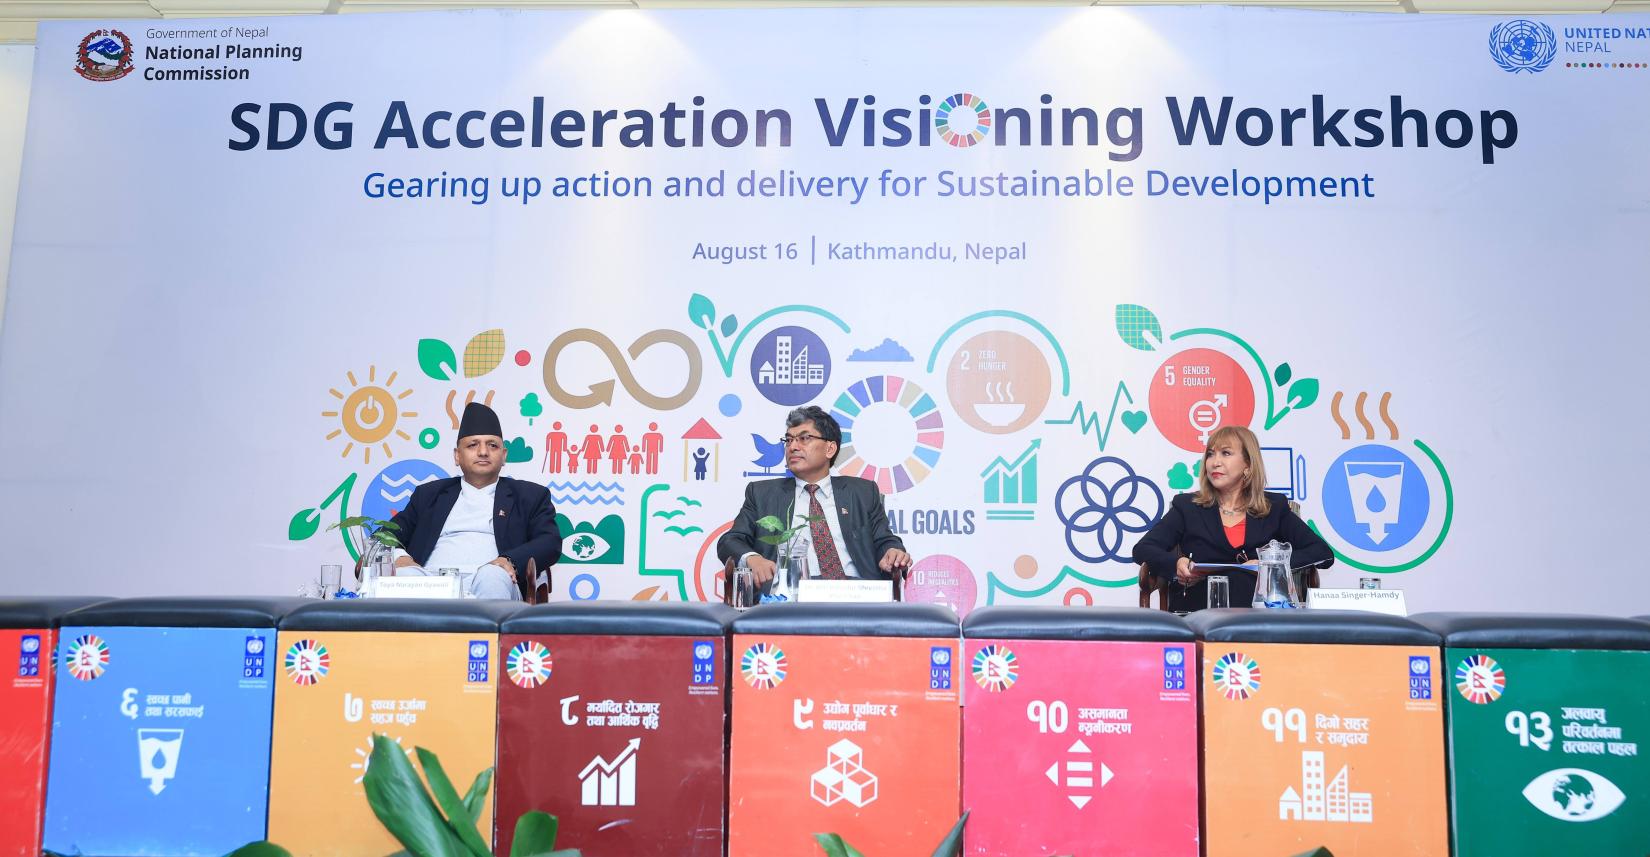 Dr. Toya Narayan Gyawali, Secretary, National Planning Commission (left), Dr. Min Bahadur Shrestha, Vice Chair, National Planning Commission (middle) and Ms. Hanaa Singer, UN Resident Coordinator, United Nations are sitting on stage with the SDG blocks lined in front of them and workshop banner behind them. The banners are filled with colorful SDG symbols